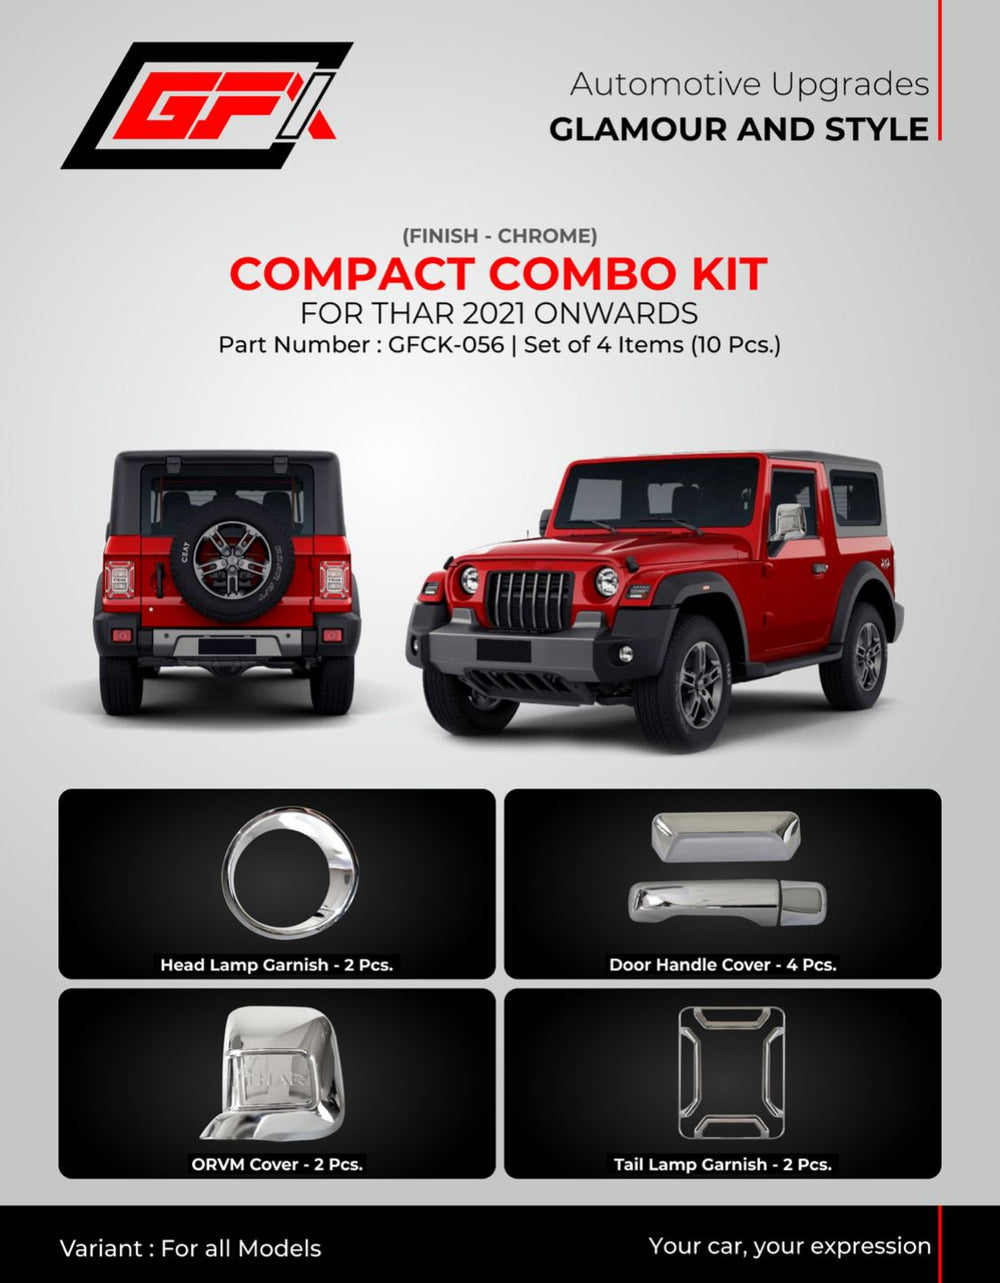 2022 Mahindra Thar With New Logo — All Changes Explained